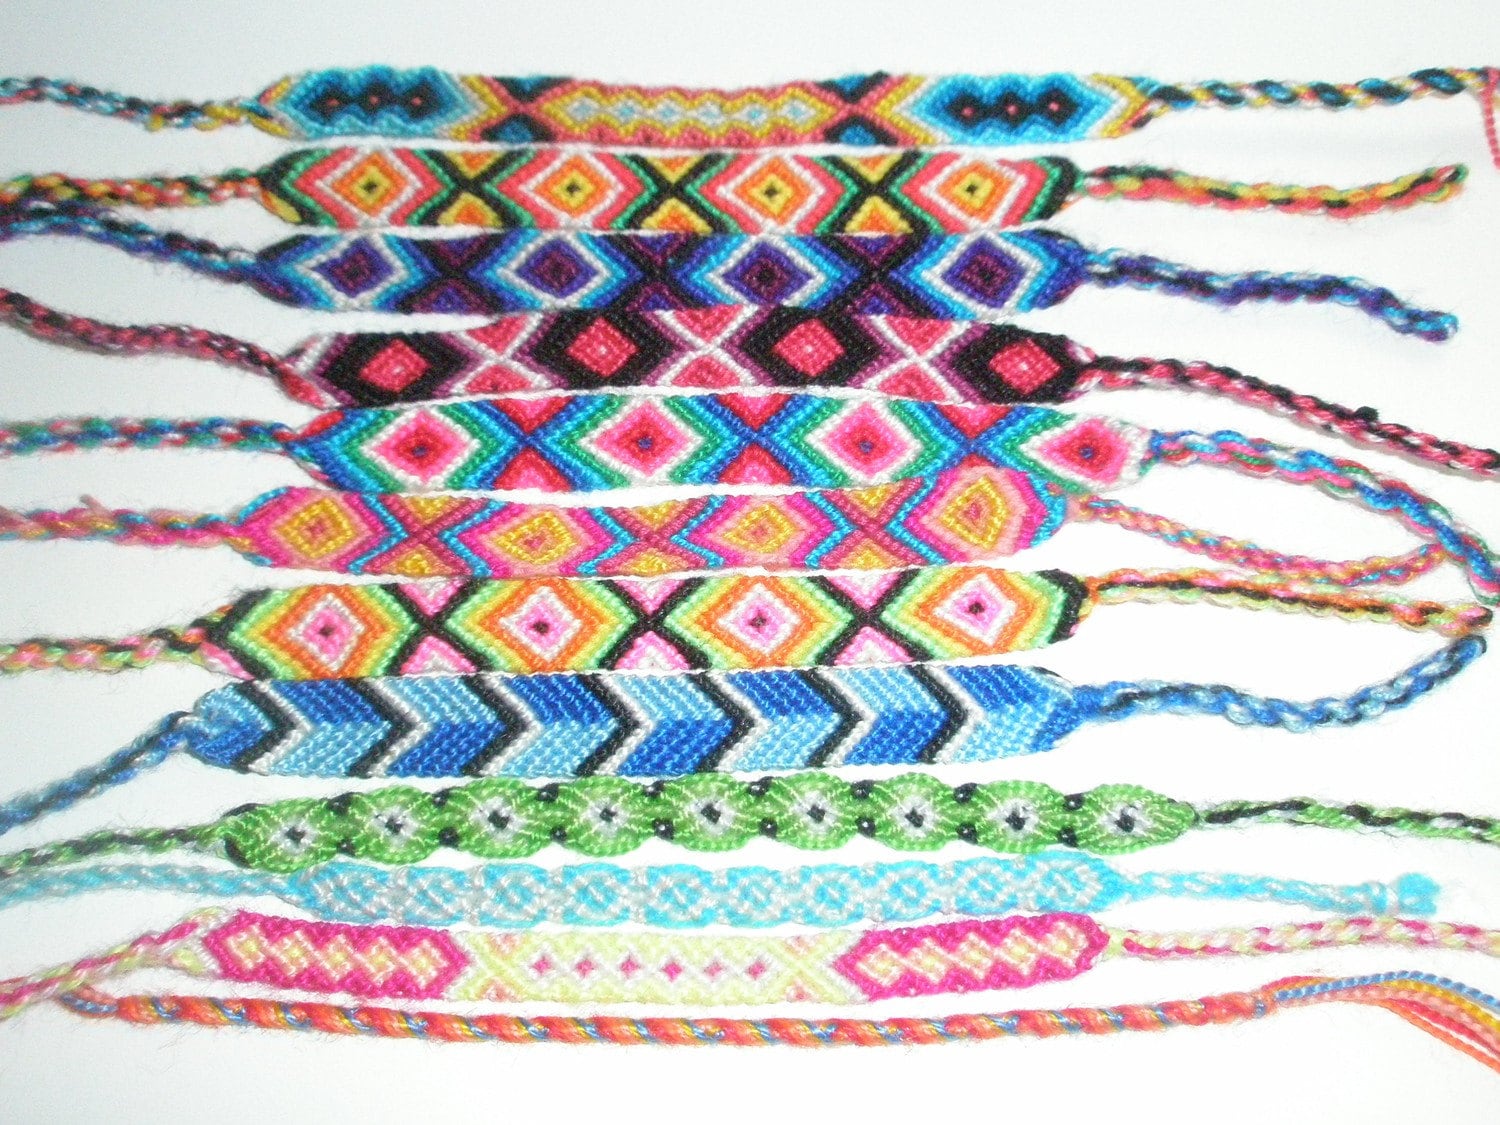 Embroidery Floss Friendship Bracelet Patterns - Embroidery